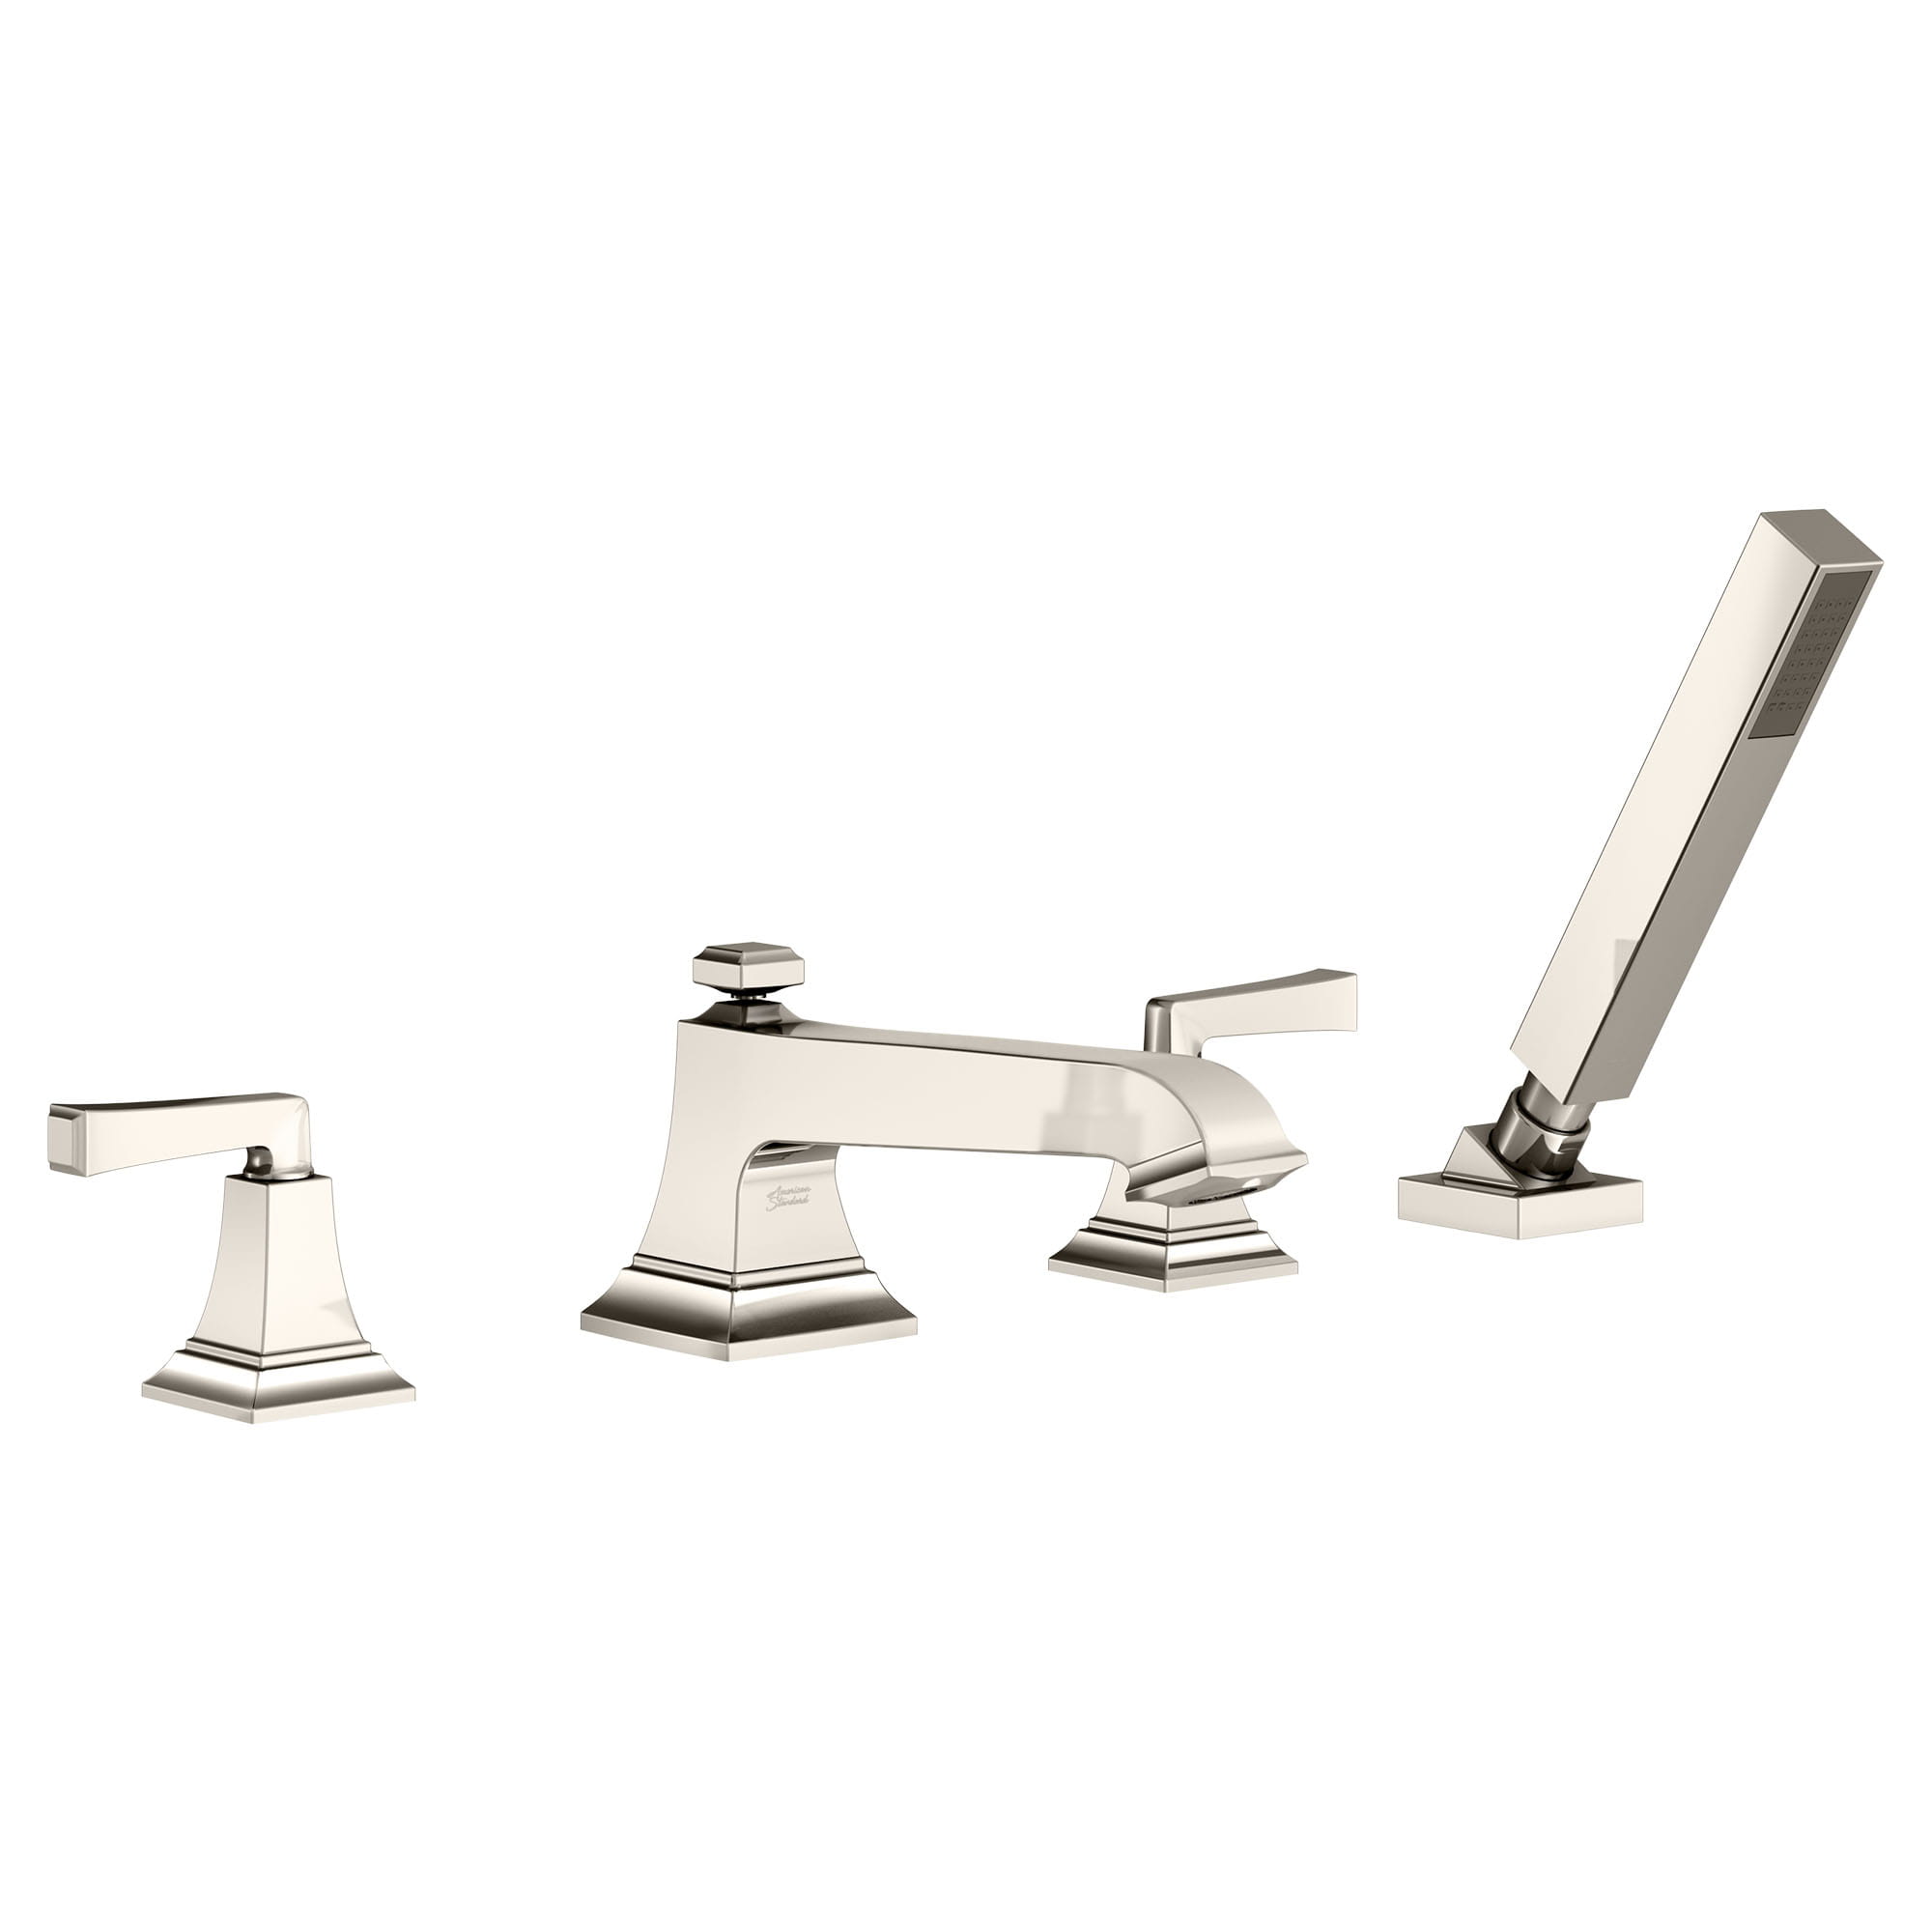 Town Square S Bathub Faucet With Lever Handles and Personal Shower for Flash Rough in Valve POLISHED  NICKEL